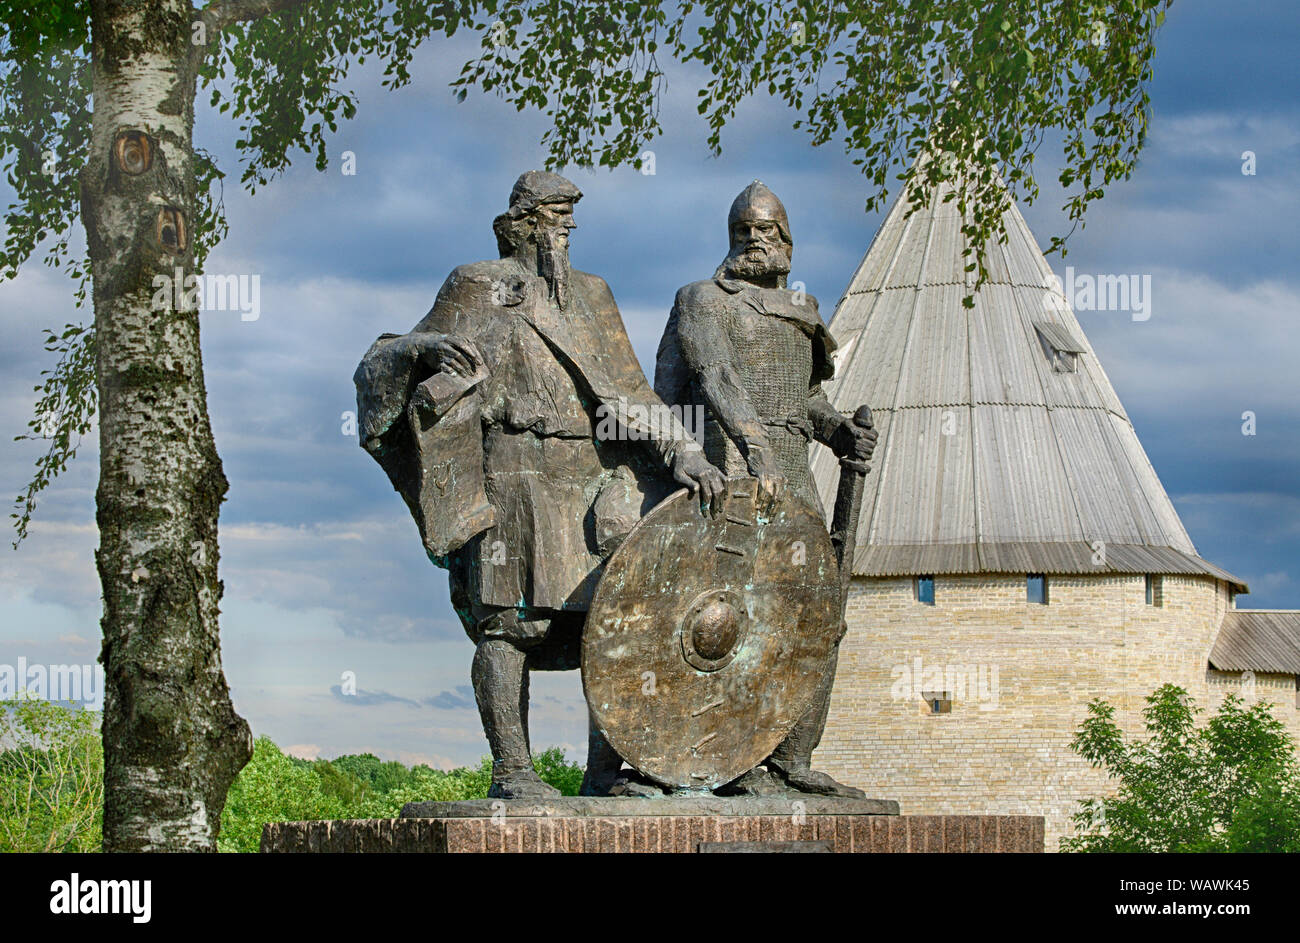 Saint Petersburg, Staraya Ladoga, Russia - June 22, 2019: Monument to the two princes Rurik and Oleg, founding the old Russian state in the background Stock Photo